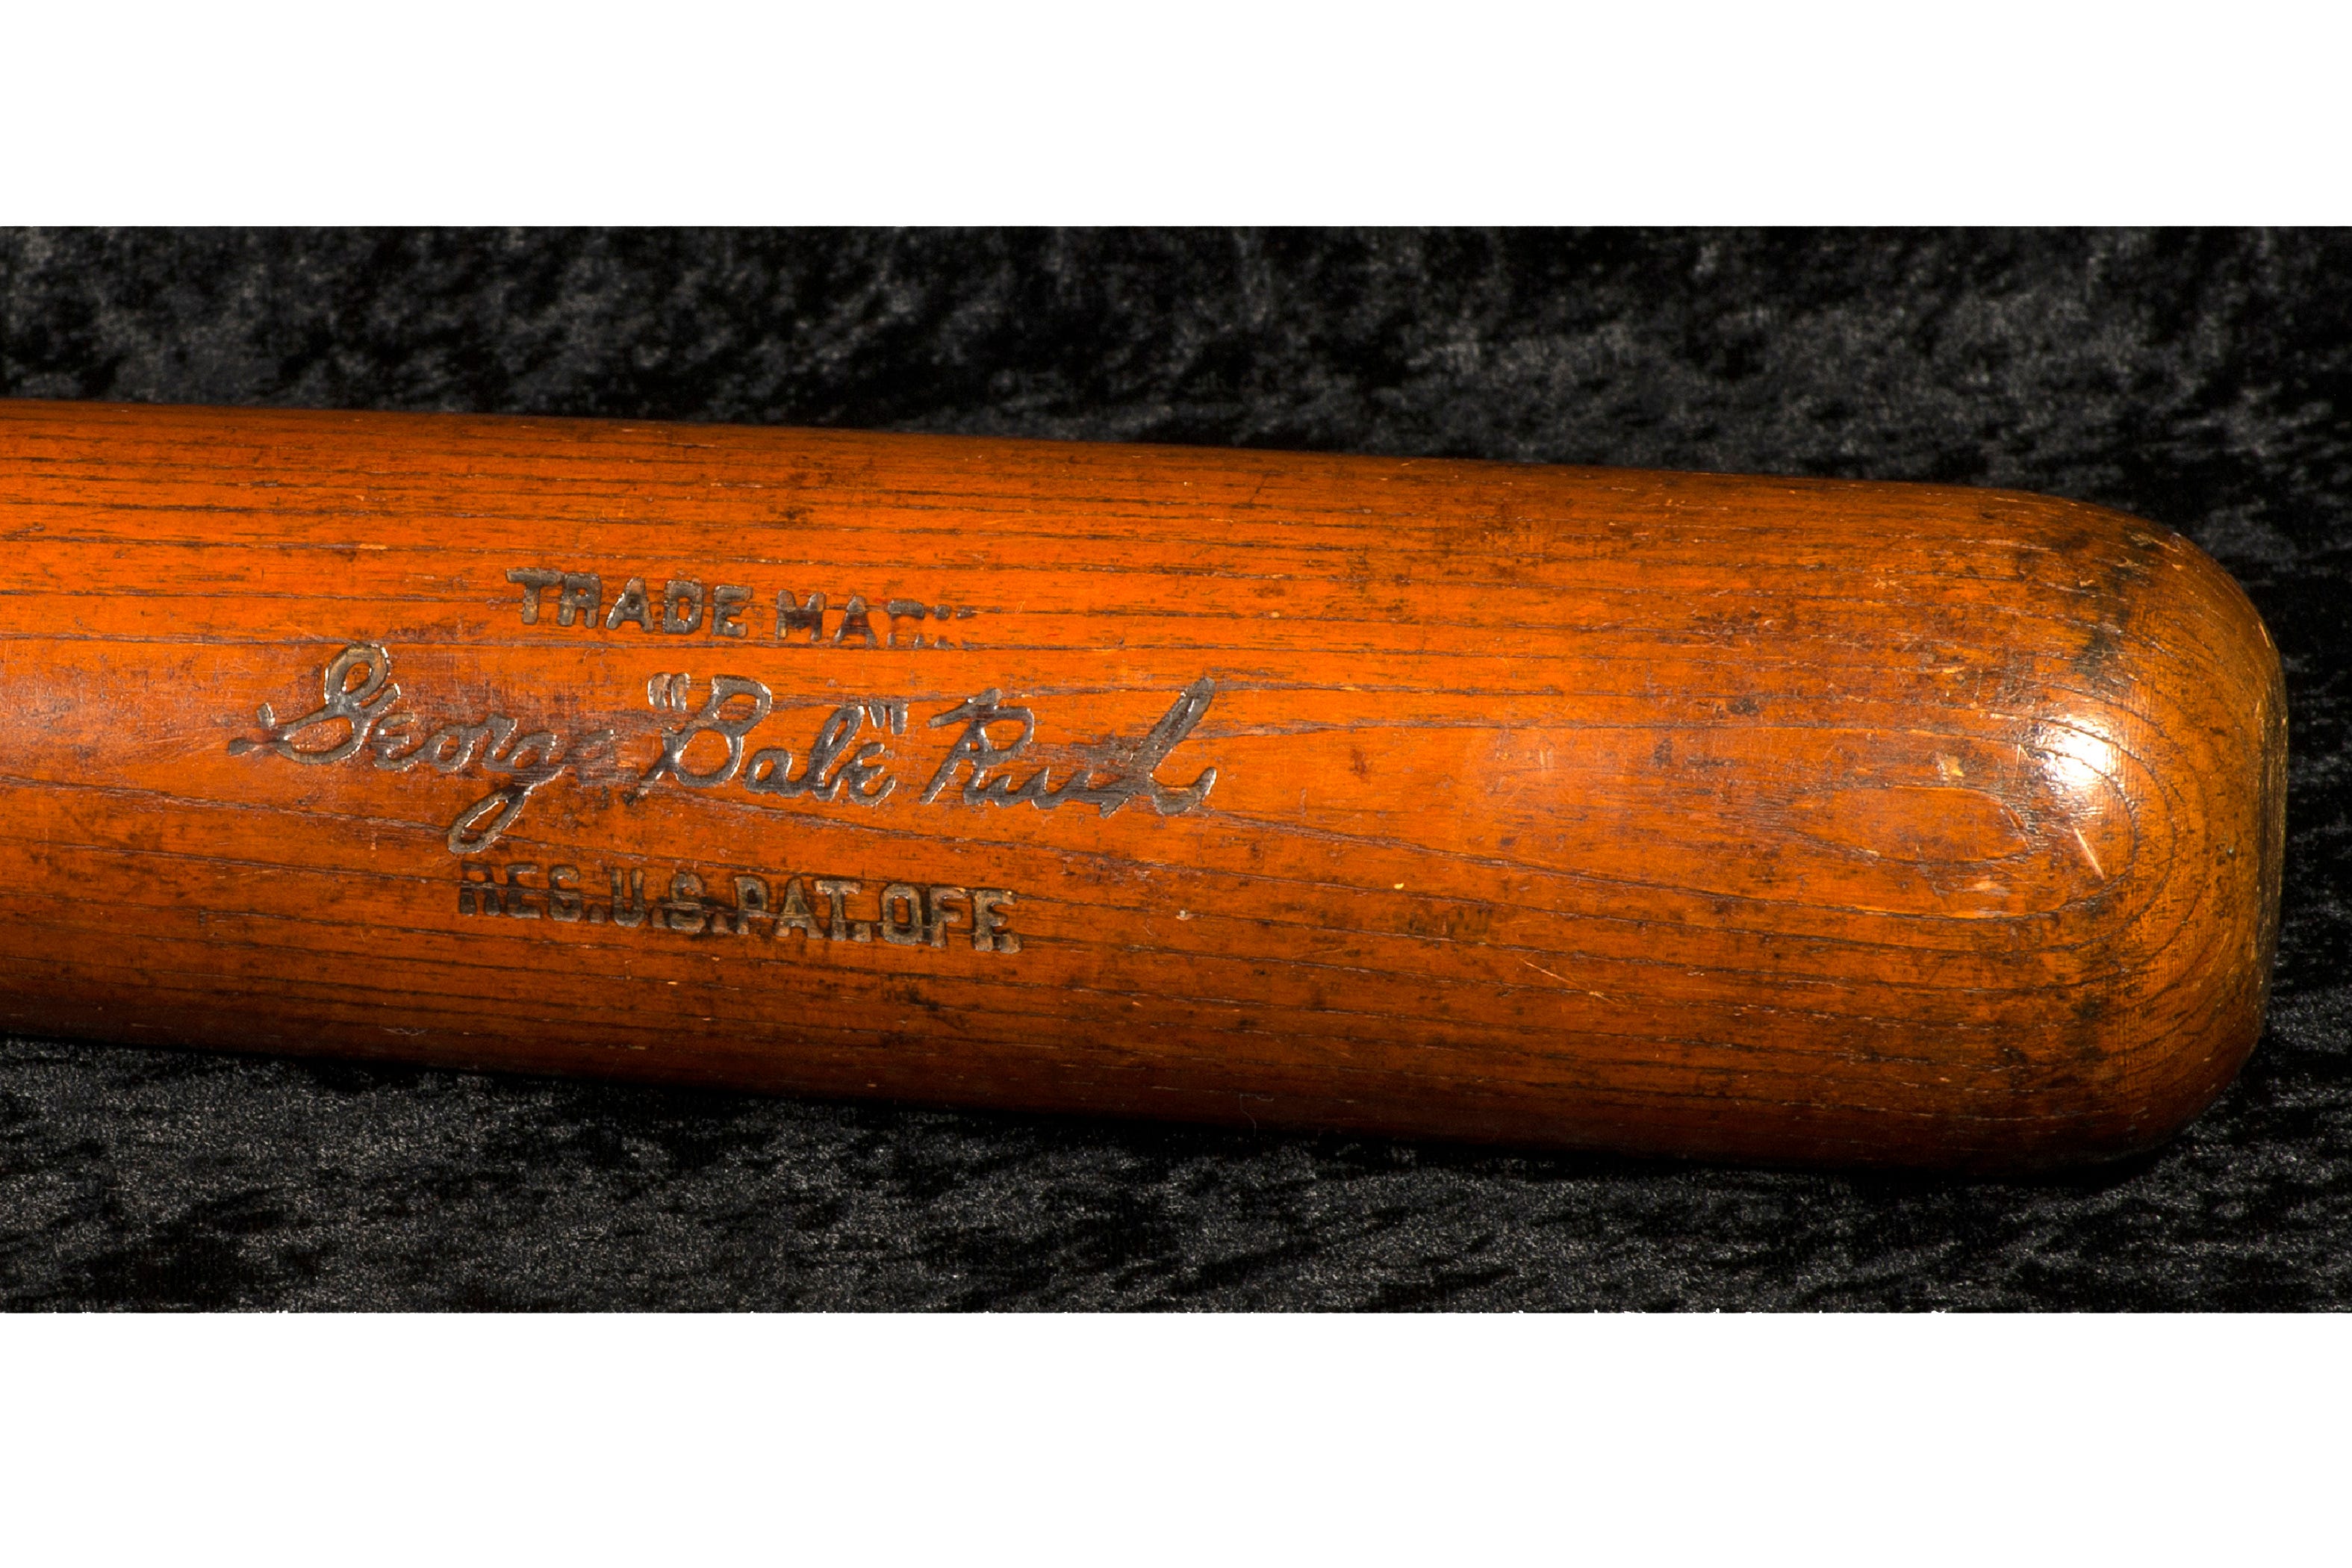 babe ruth auction